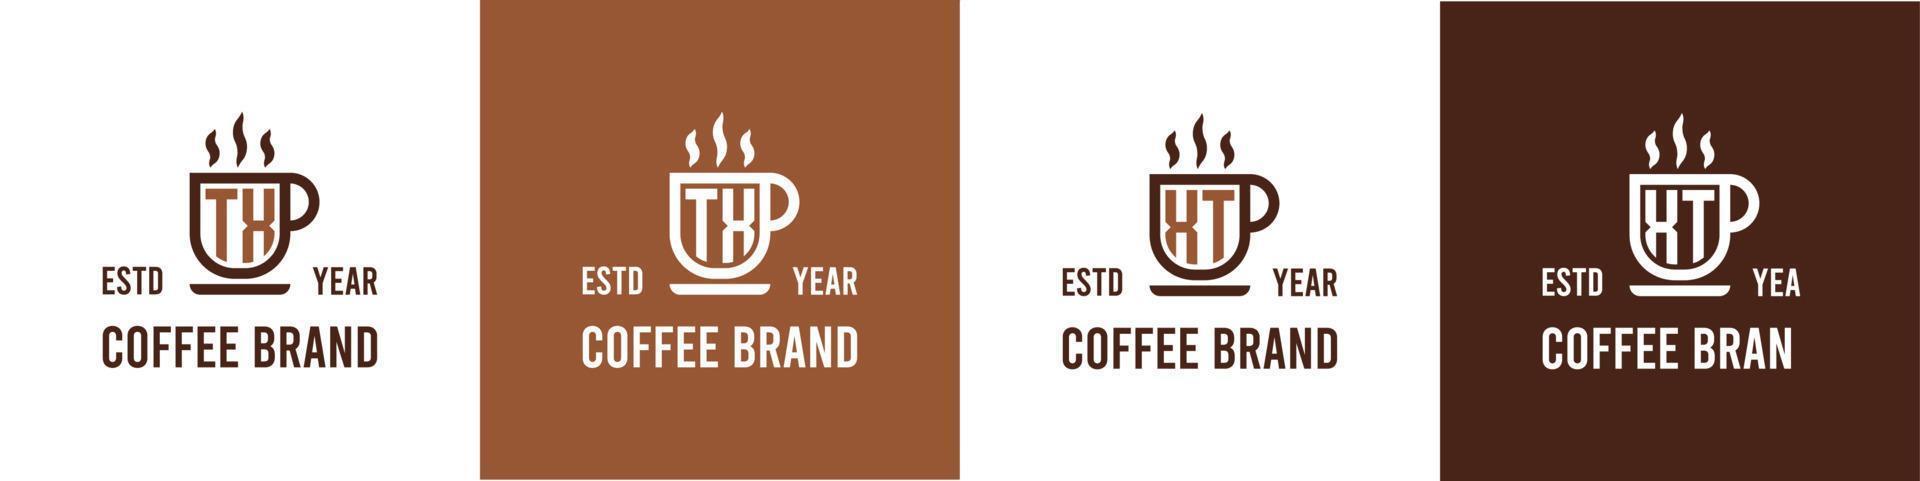 Letter TX and XT Coffee Logo, suitable for any business related to Coffee, Tea, or Other with TX or XT initials. vector